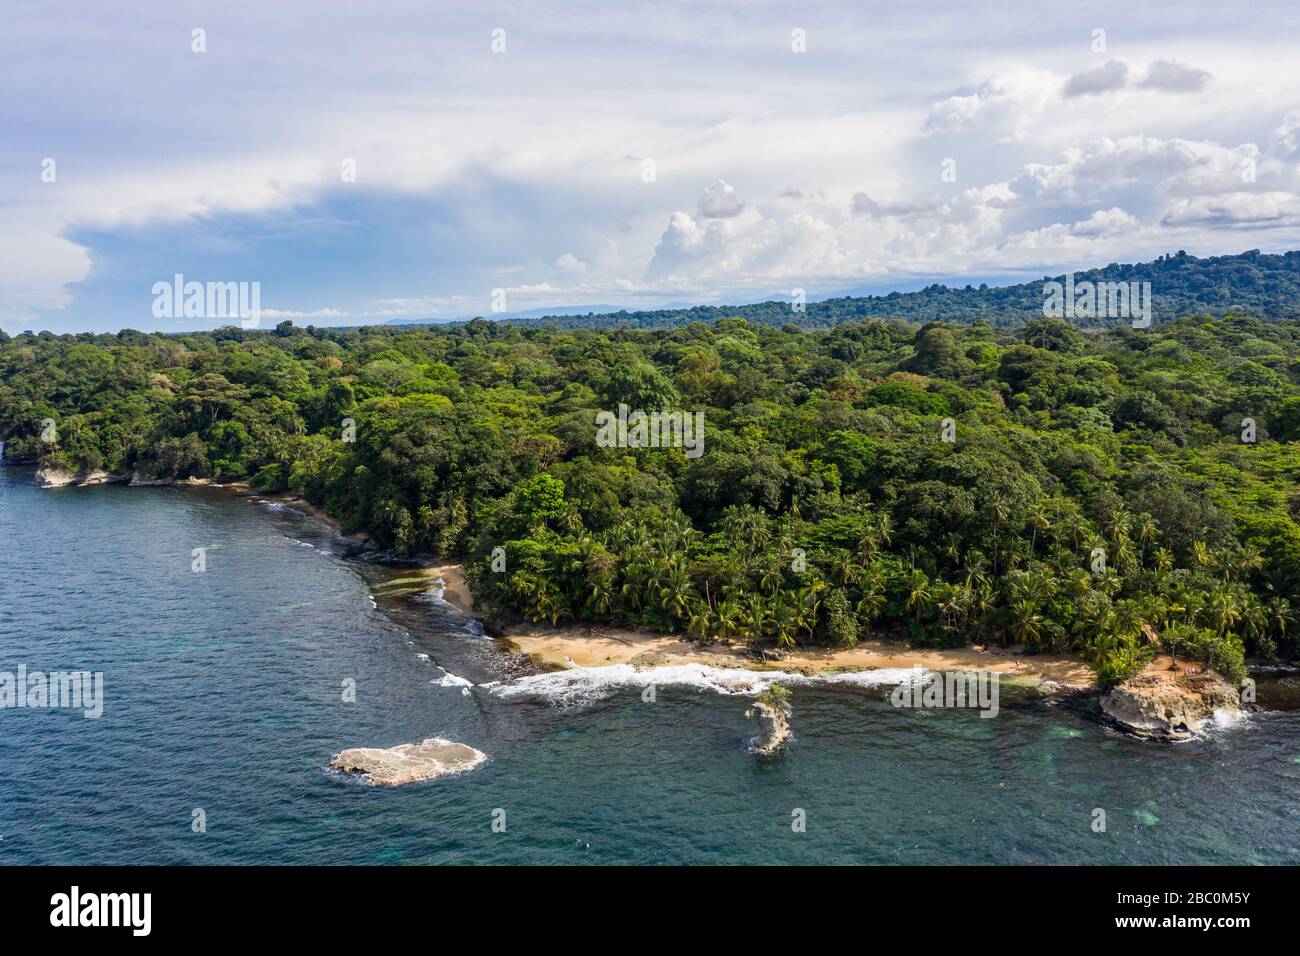 Aerial view of the Caribbean coast of the Gandoca Manzanillo Wildlife Refuge in the Limón Province of eastern Costa Rica. Stock Photo